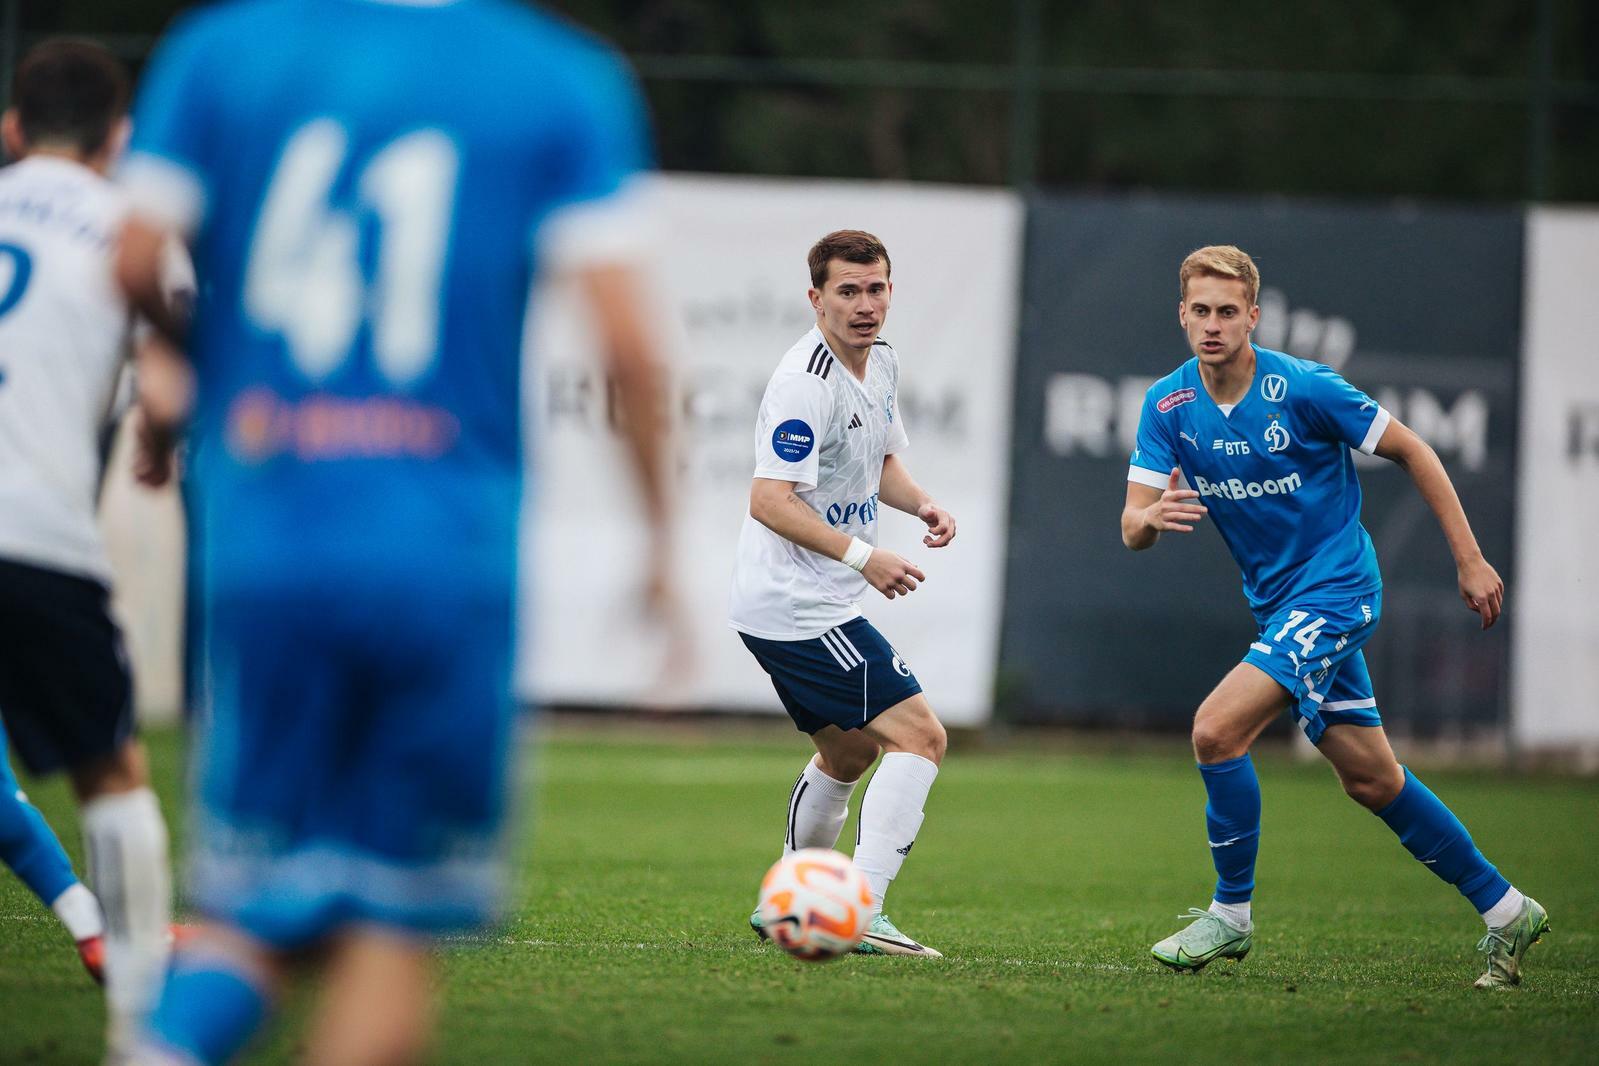 FC Dynamo Moscow News | Match Preview "Orenburg" vs "Dynamo": where to watch, our news, all about the opponent. Official website of Dynamo club.